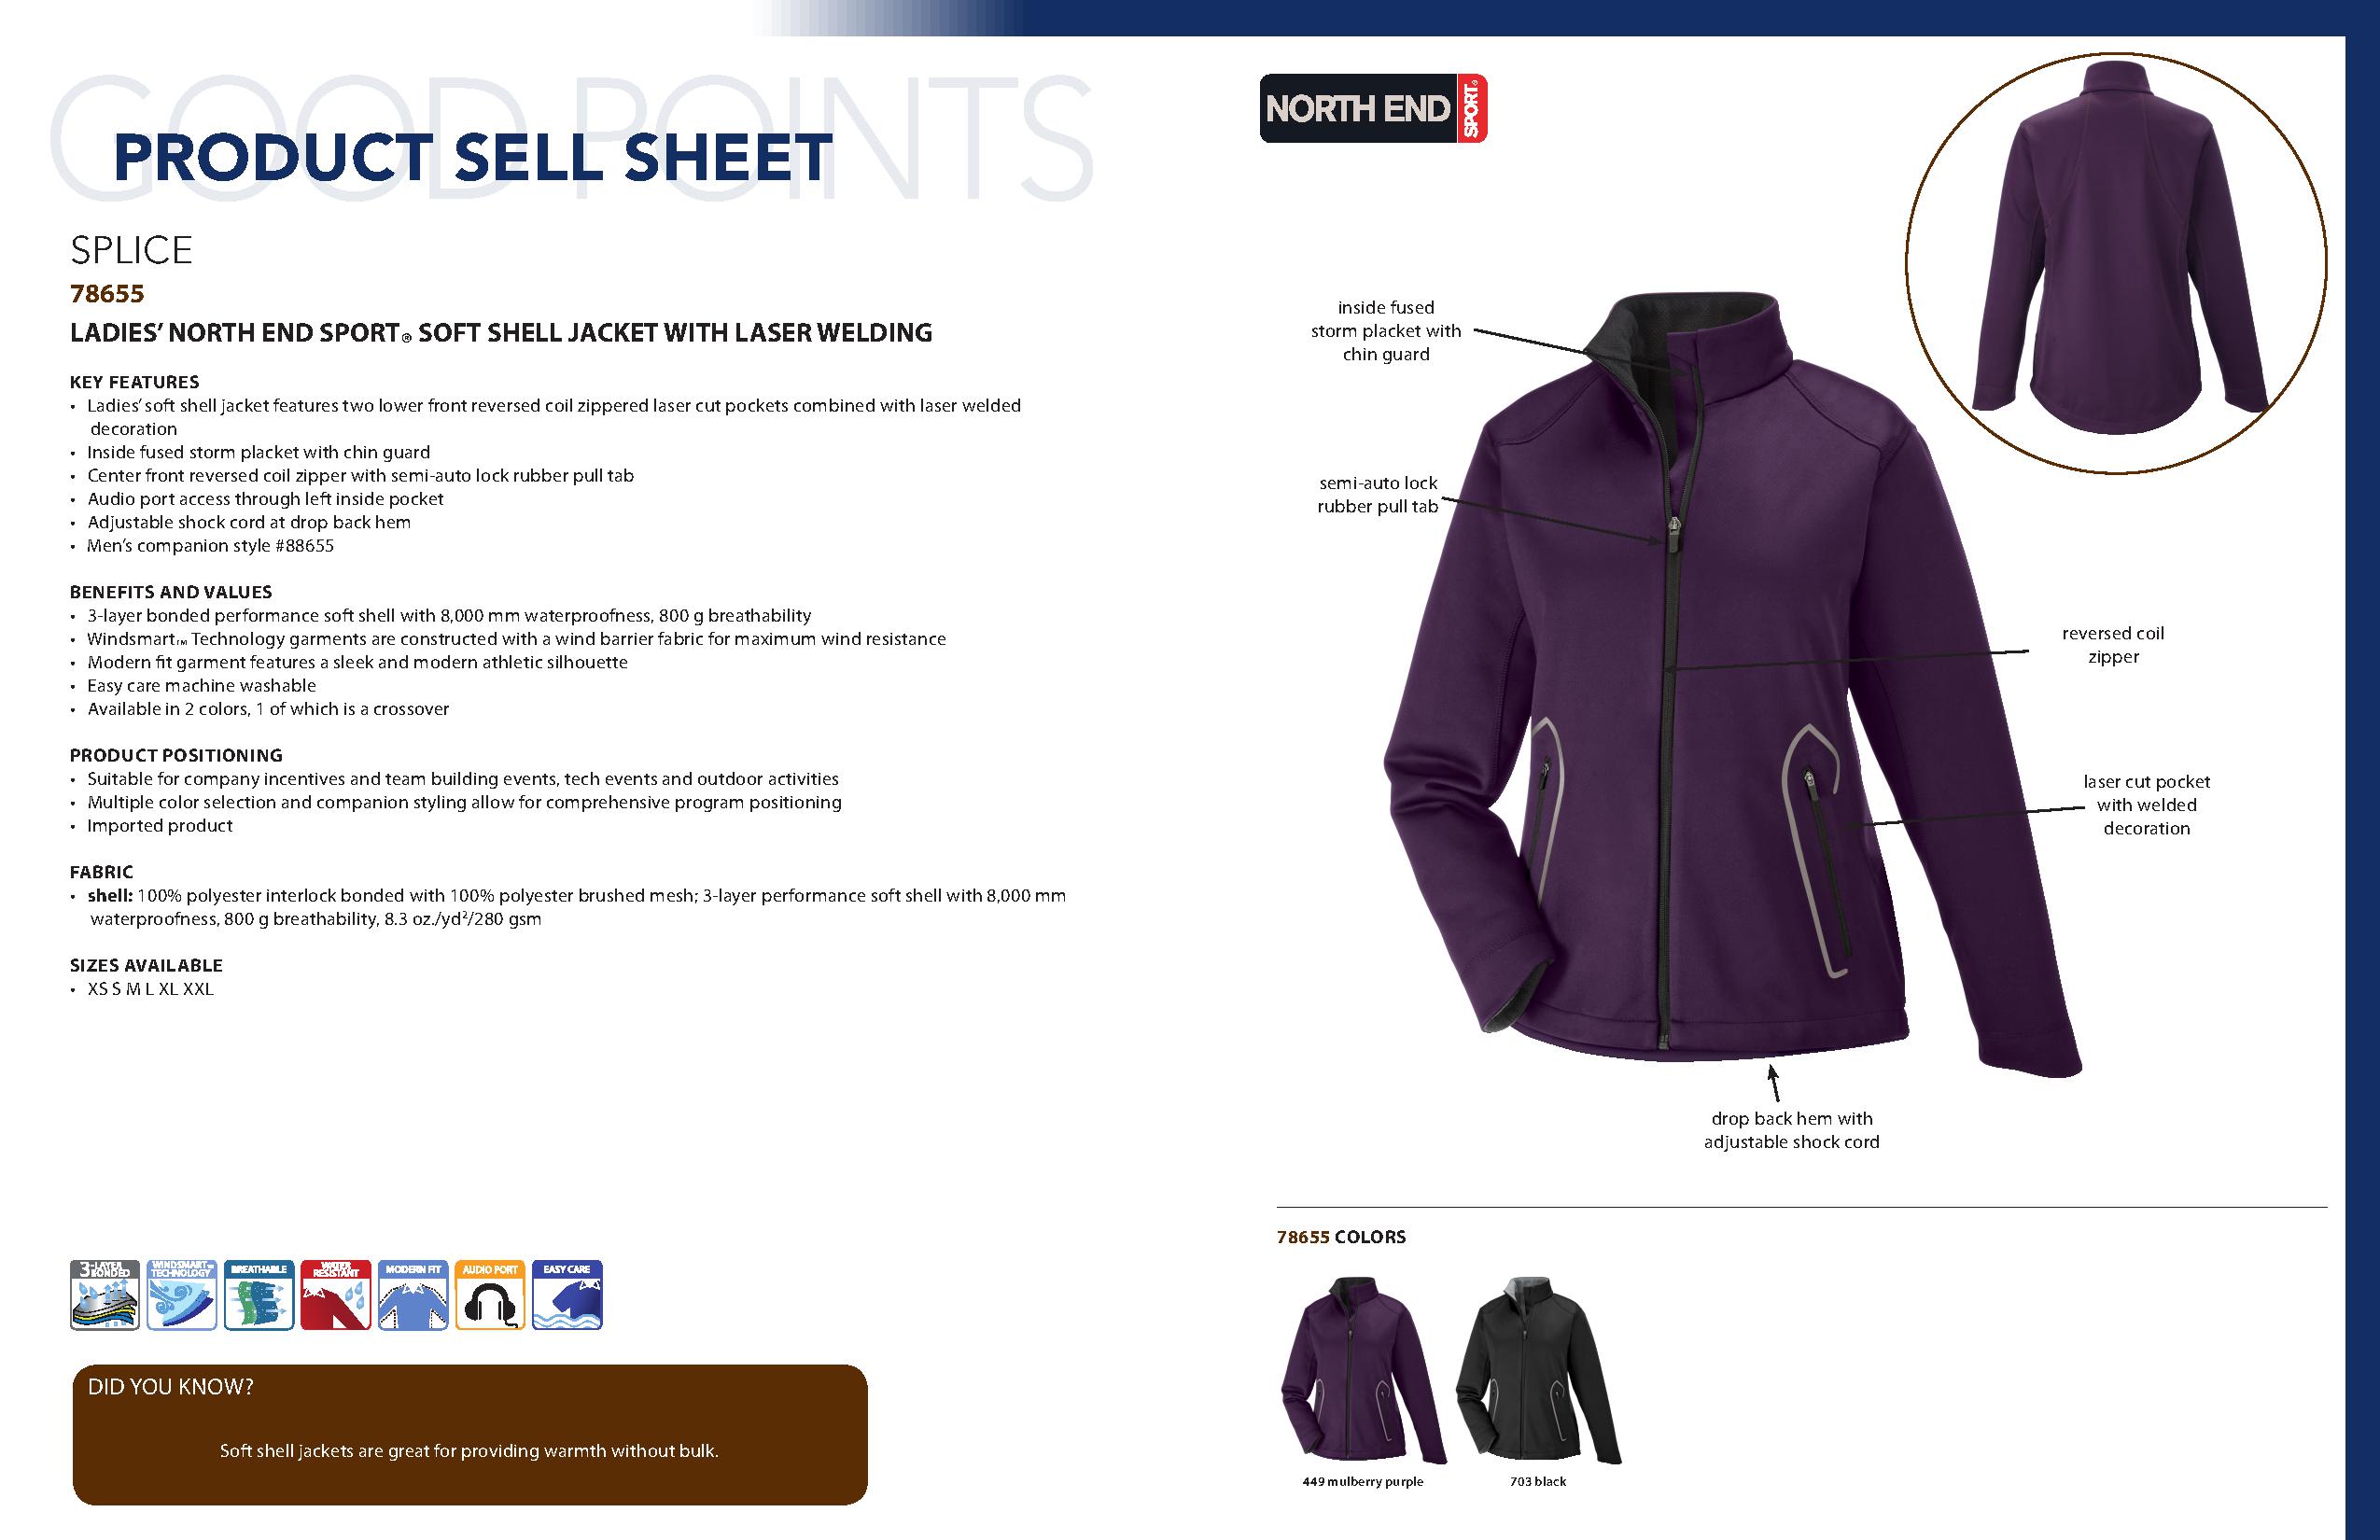 Ash City Performance Jackets 78655 - Splice Ladies' Soft Shell Jacket With Laser Welding